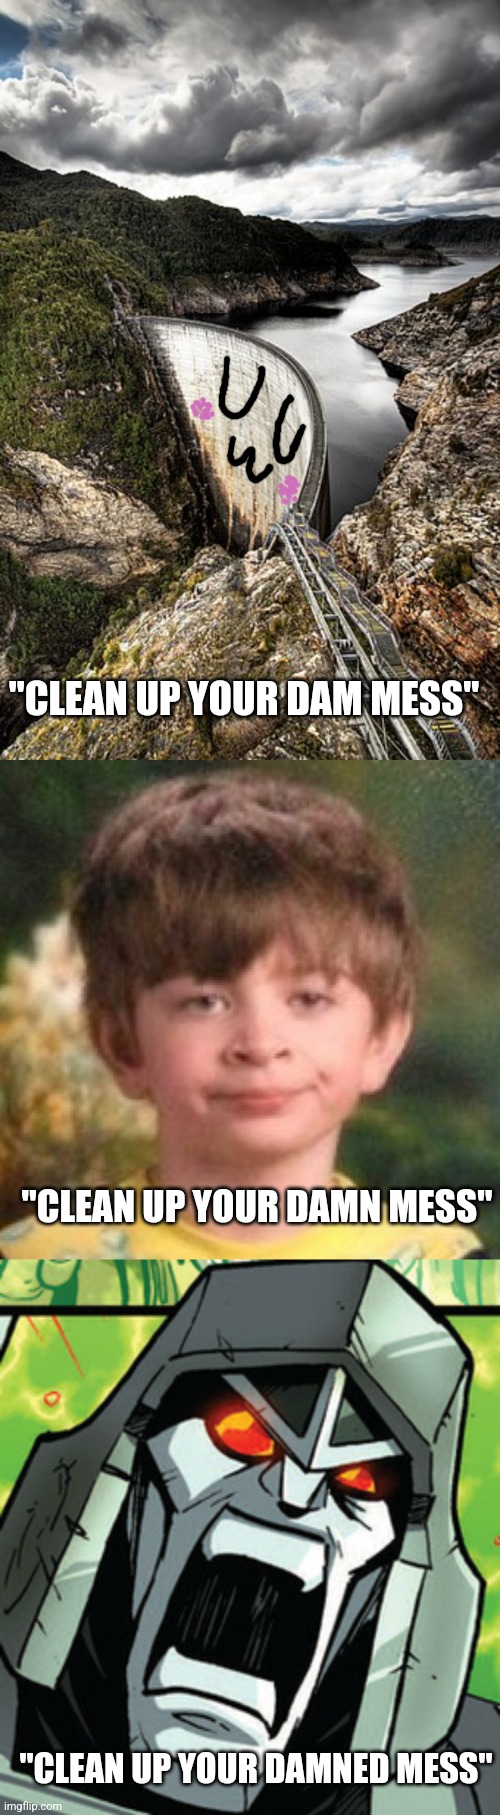 The more correct it is, the angrier it sounds | "CLEAN UP YOUR DAM MESS"; "CLEAN UP YOUR DAMN MESS"; "CLEAN UP YOUR DAMNED MESS" | image tagged in annoyed face,megatron rage,bad grammar and spelling memes,misspelled,uwu,damn | made w/ Imgflip meme maker